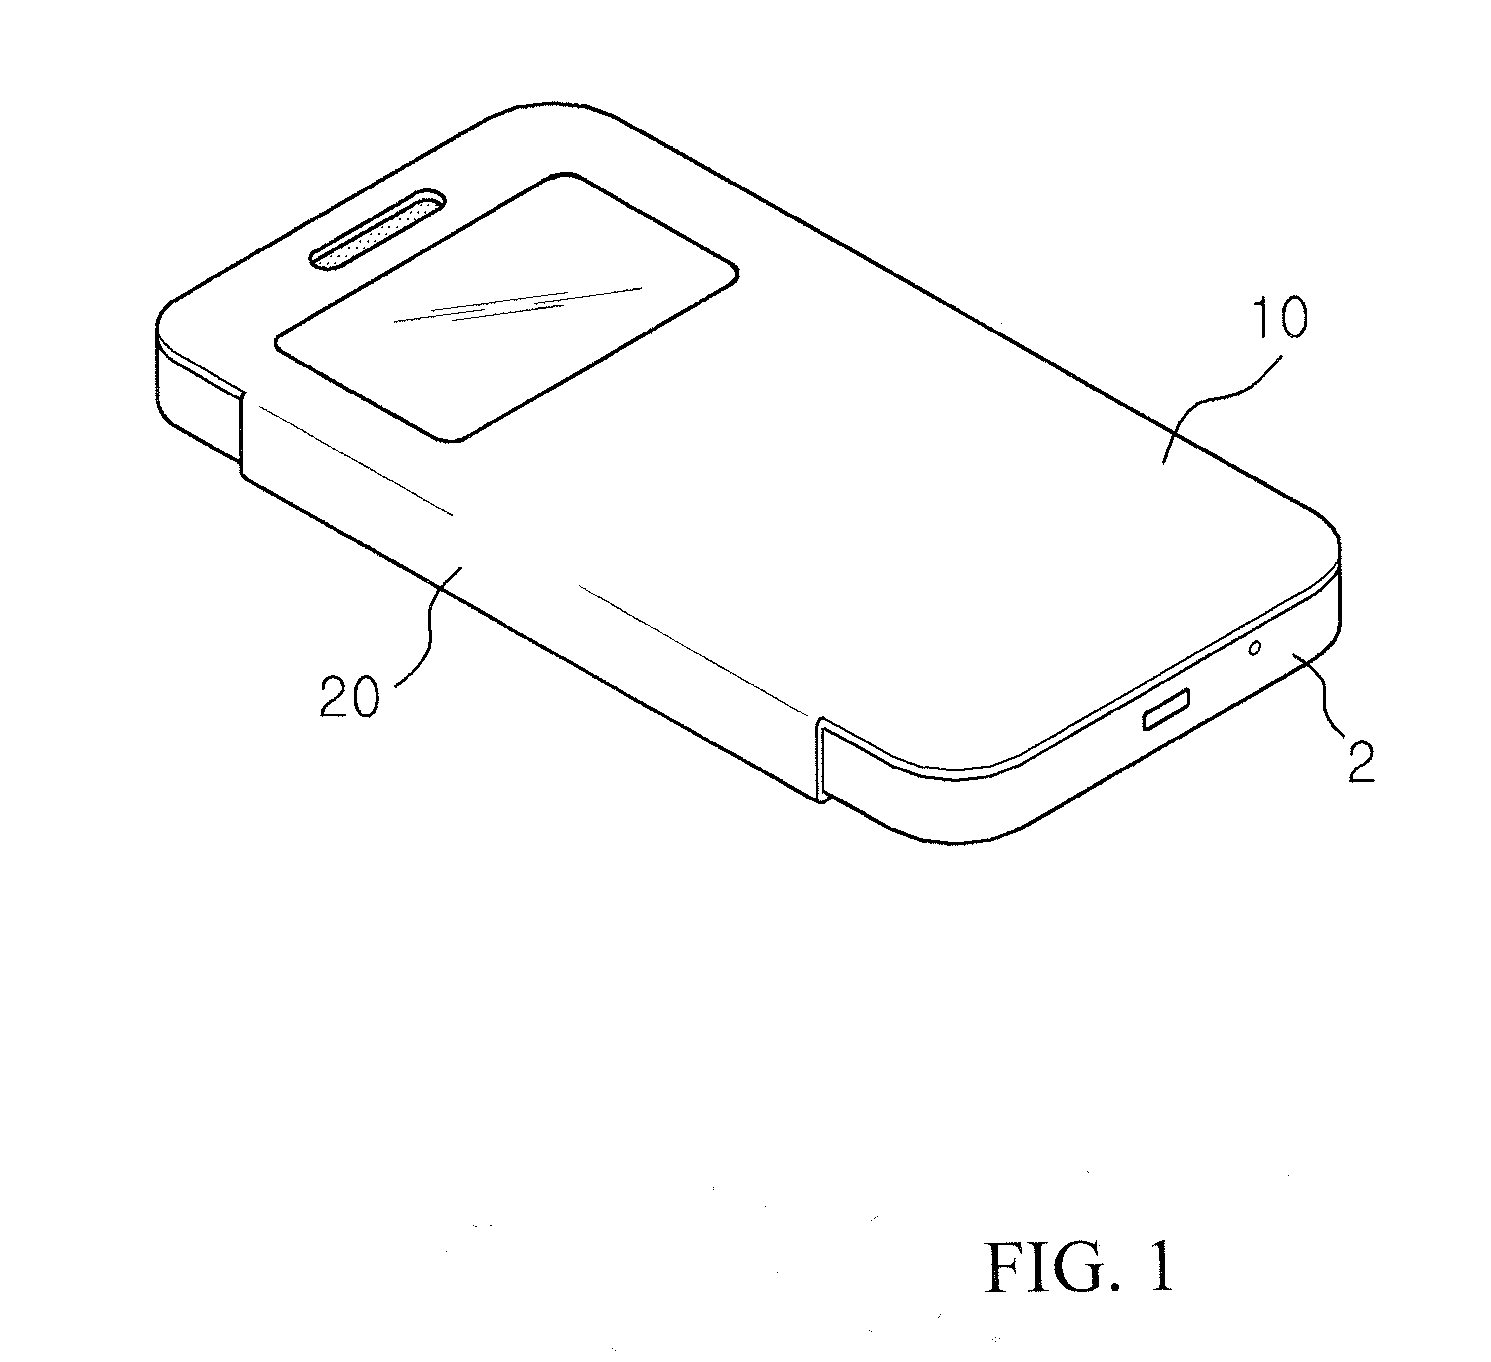 Flip type case for portable electronic device